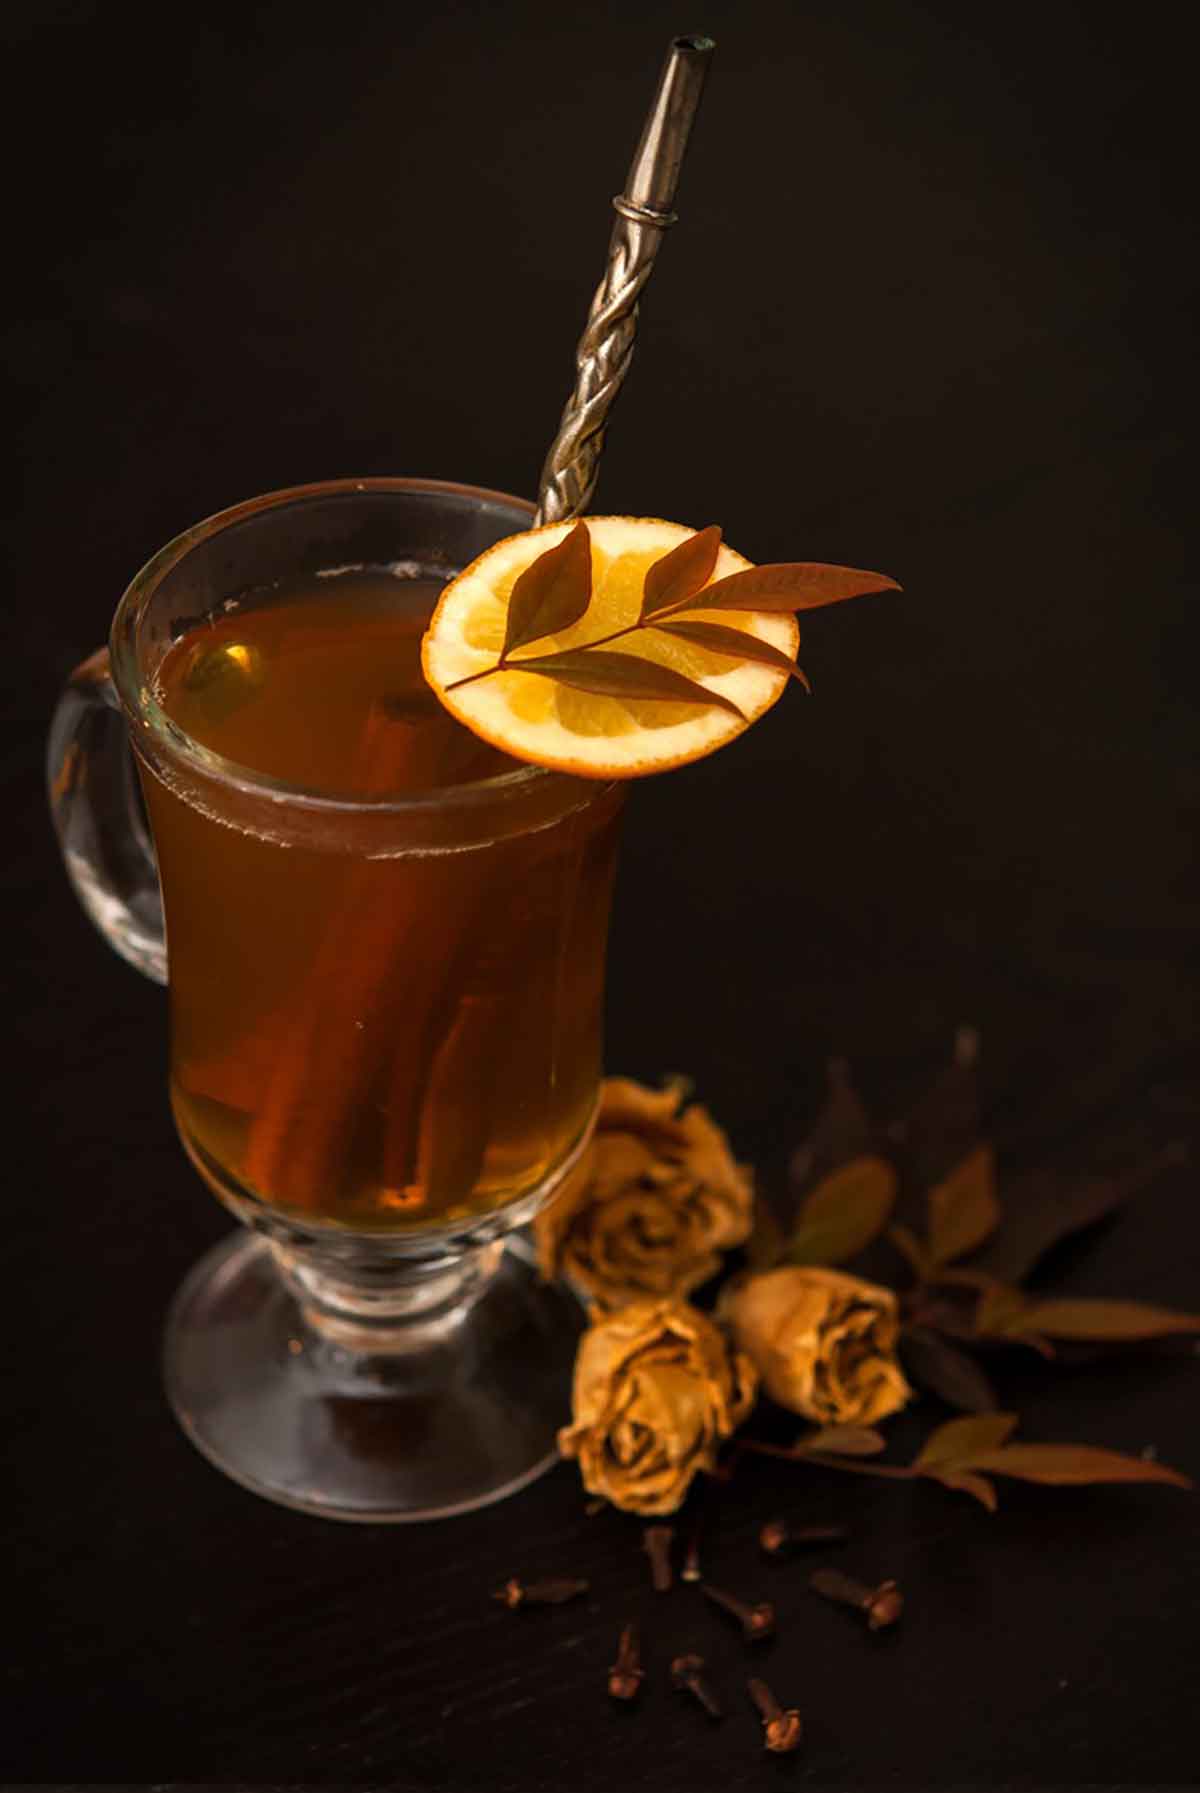 A hot toddy on a table with an orange and leaf garnish with a few dry roses.